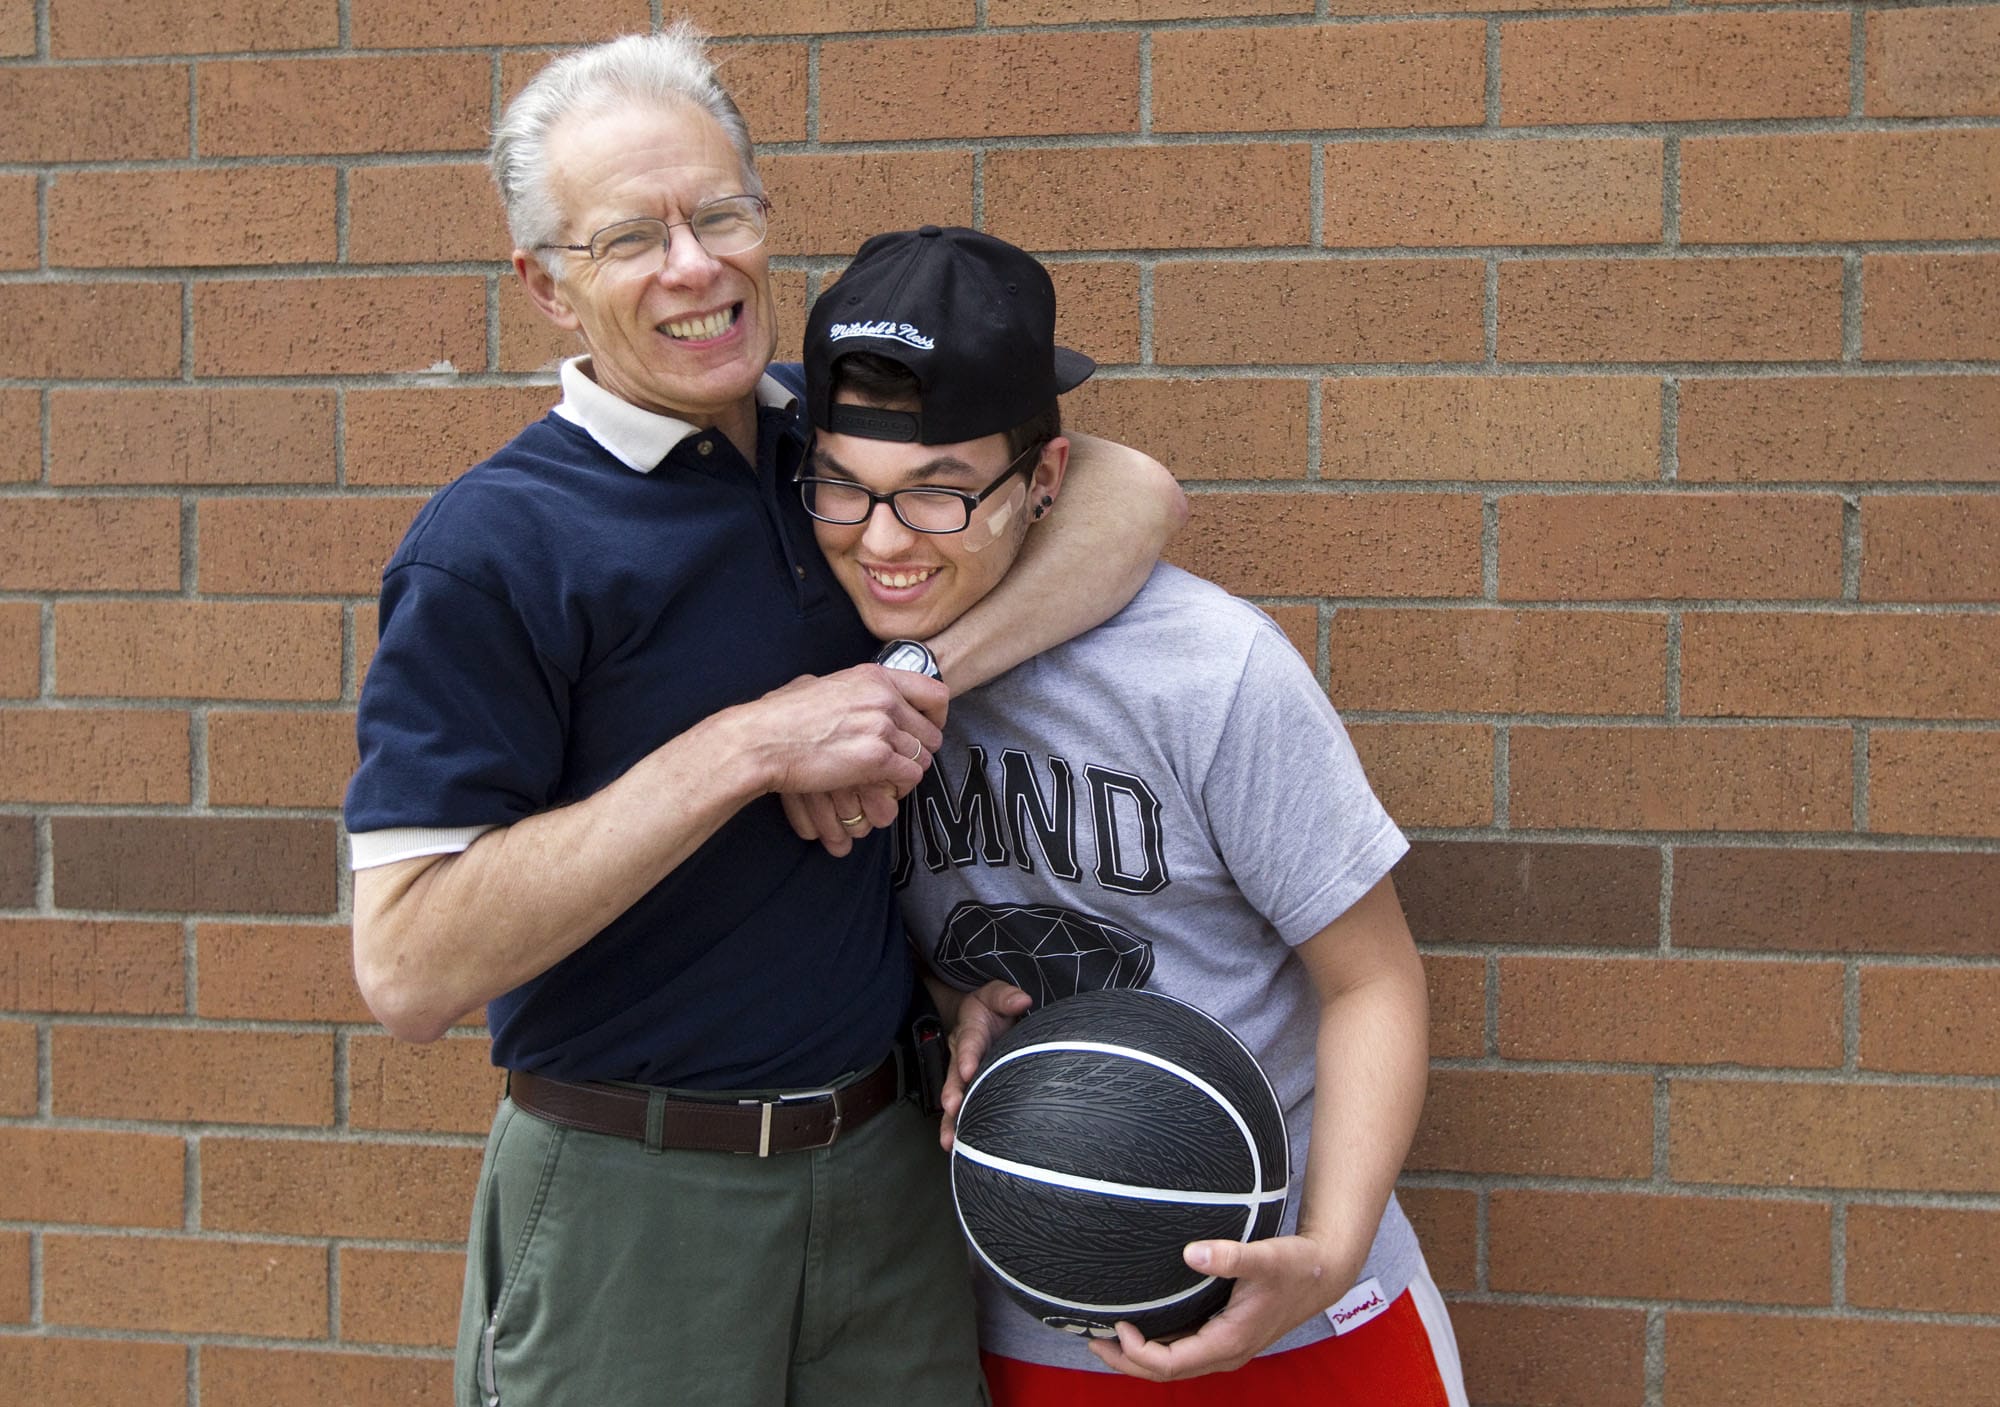 Jamie Stratton, left, shares a light-hearted squeeze with David Hinds, his &quot;little brother,&quot; during a break in shooting hoops at Fisher's Landing Elementary School on a recent Sunday afternoon.